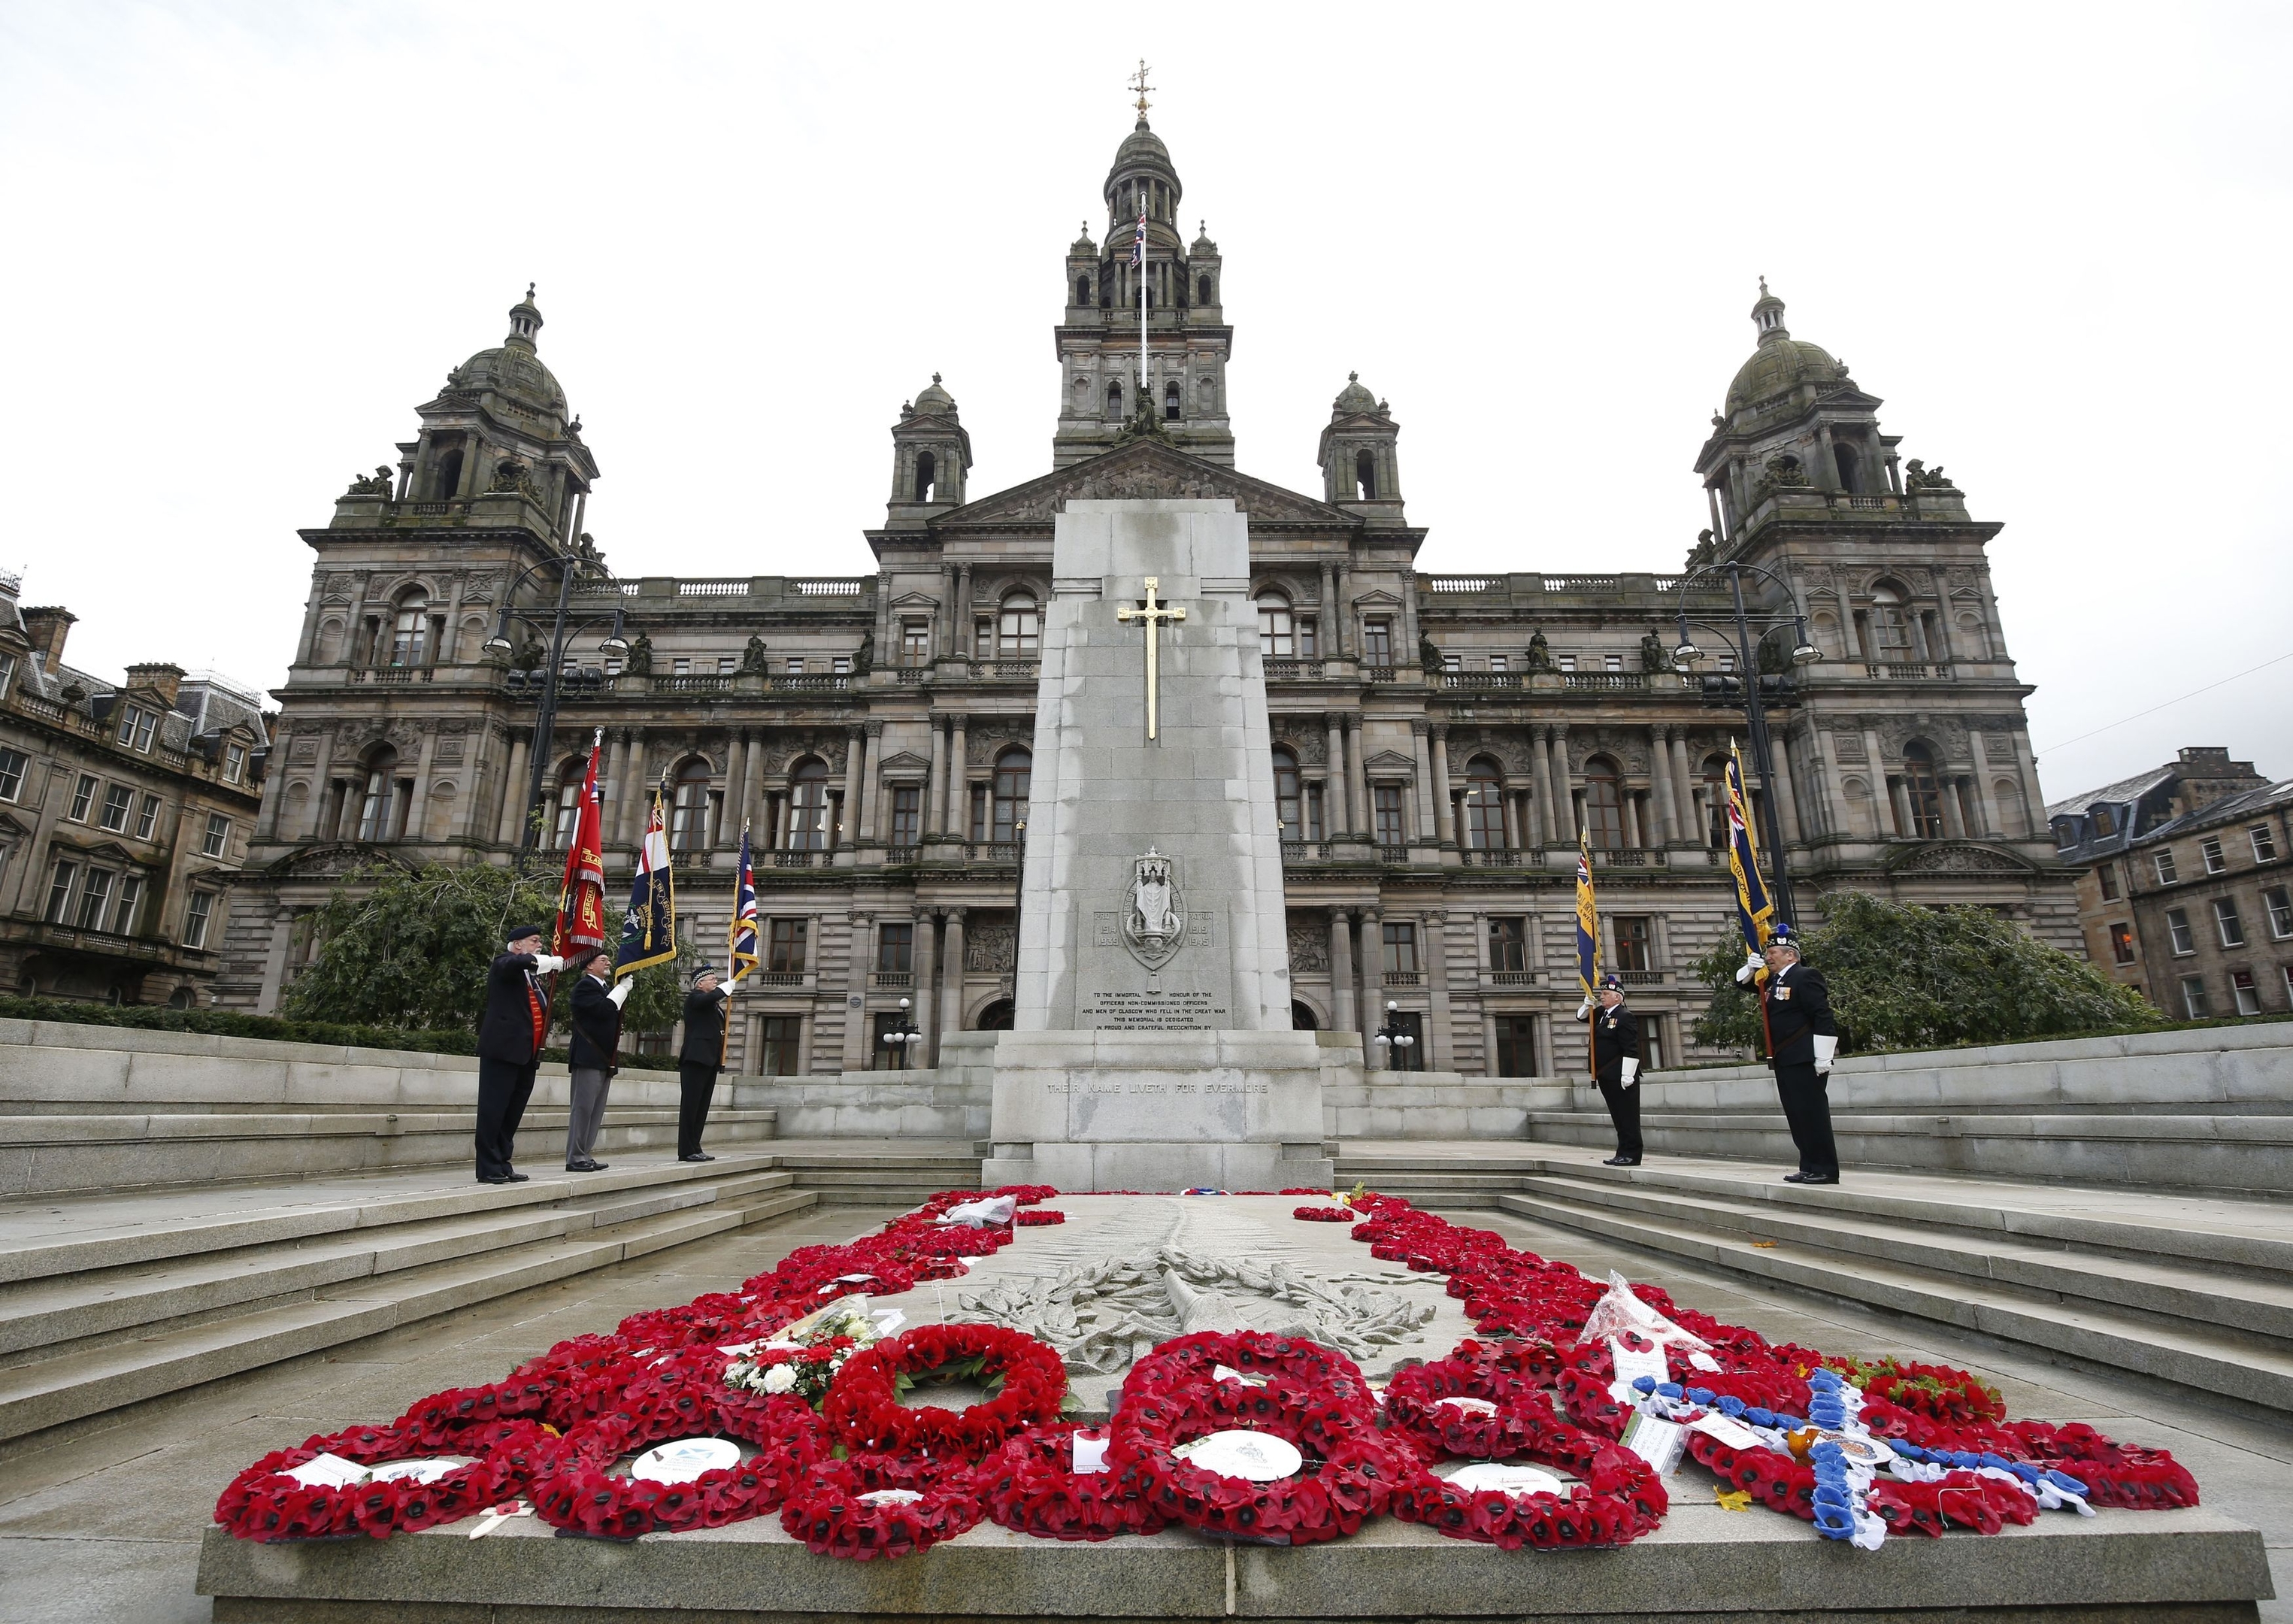 Two minutes silence is observed at the Cenotaph monument in George Square, Glasgow to mark Armistice Day, the anniversary of the end of the First World War. 